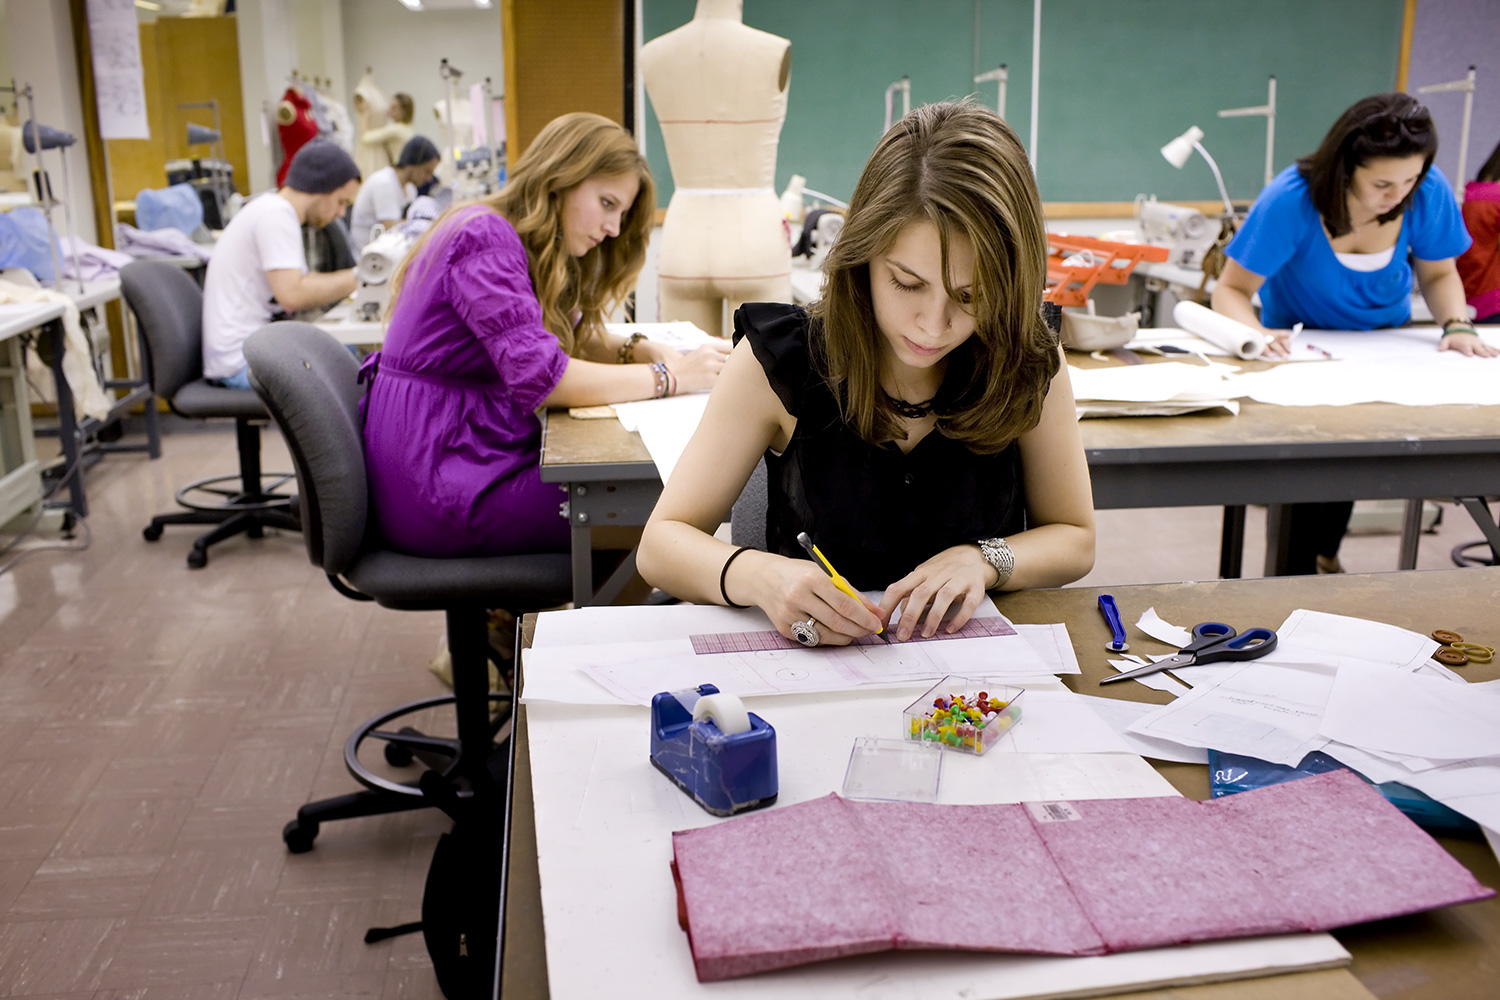 Academics and Best Schools For Fashion Design